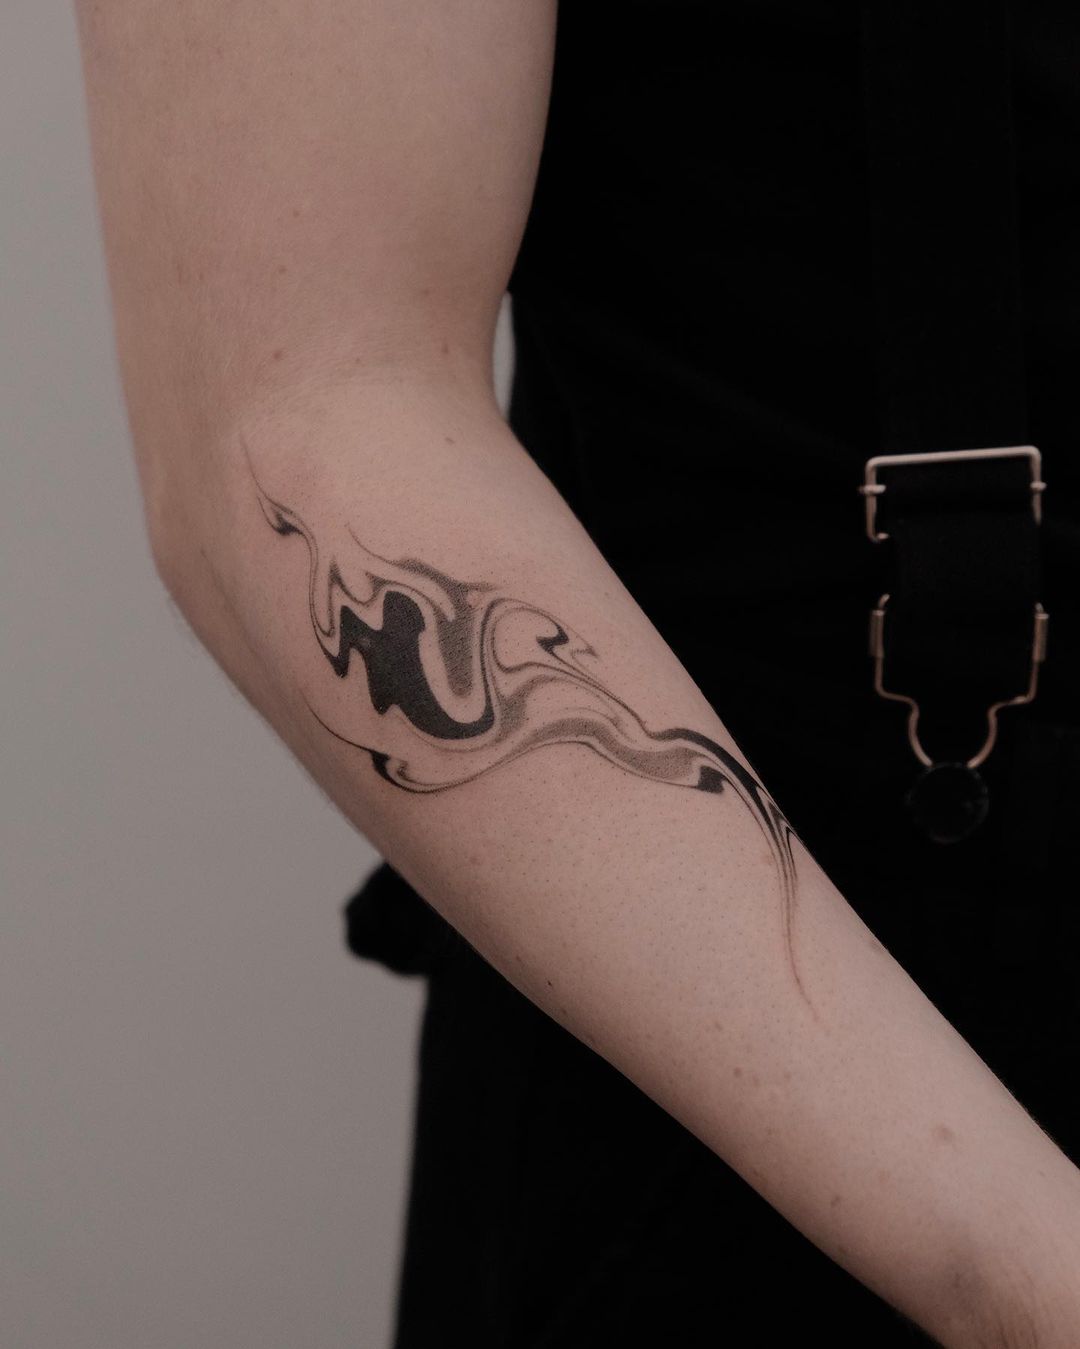 Cubism and surreal tattoo. Bold lines and vibrant co...